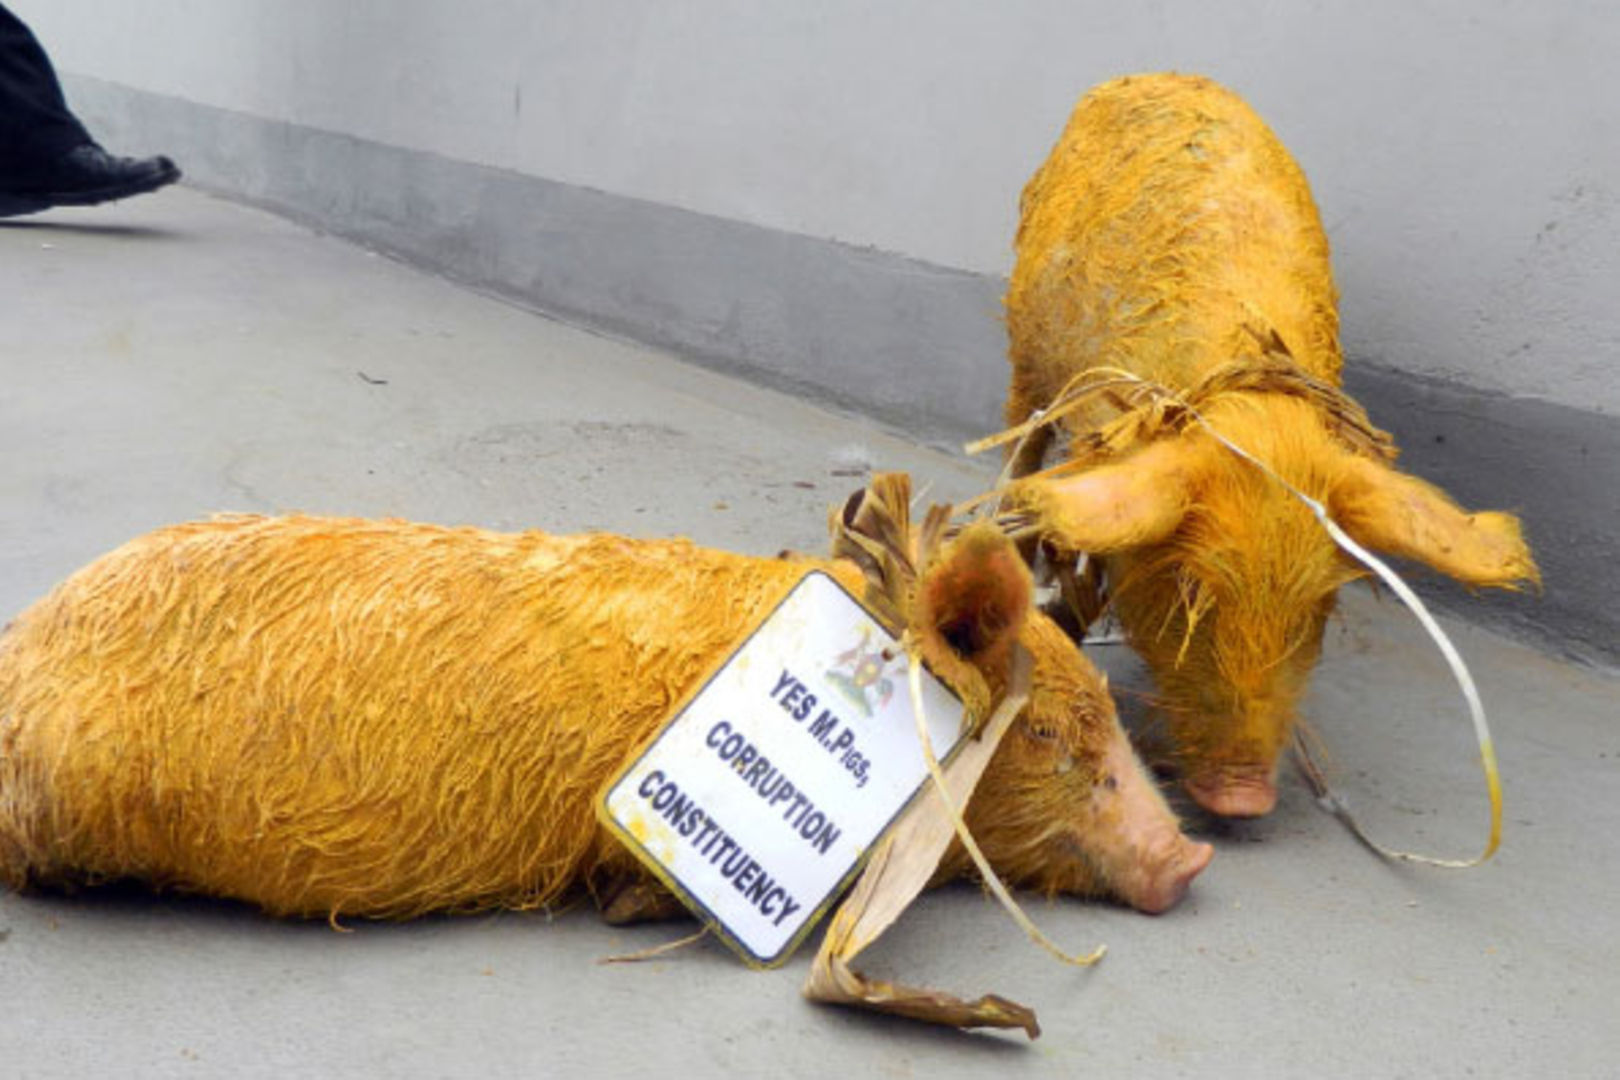 Famed for throwing yellow pigs, activists threaten to hit Kampala streets again